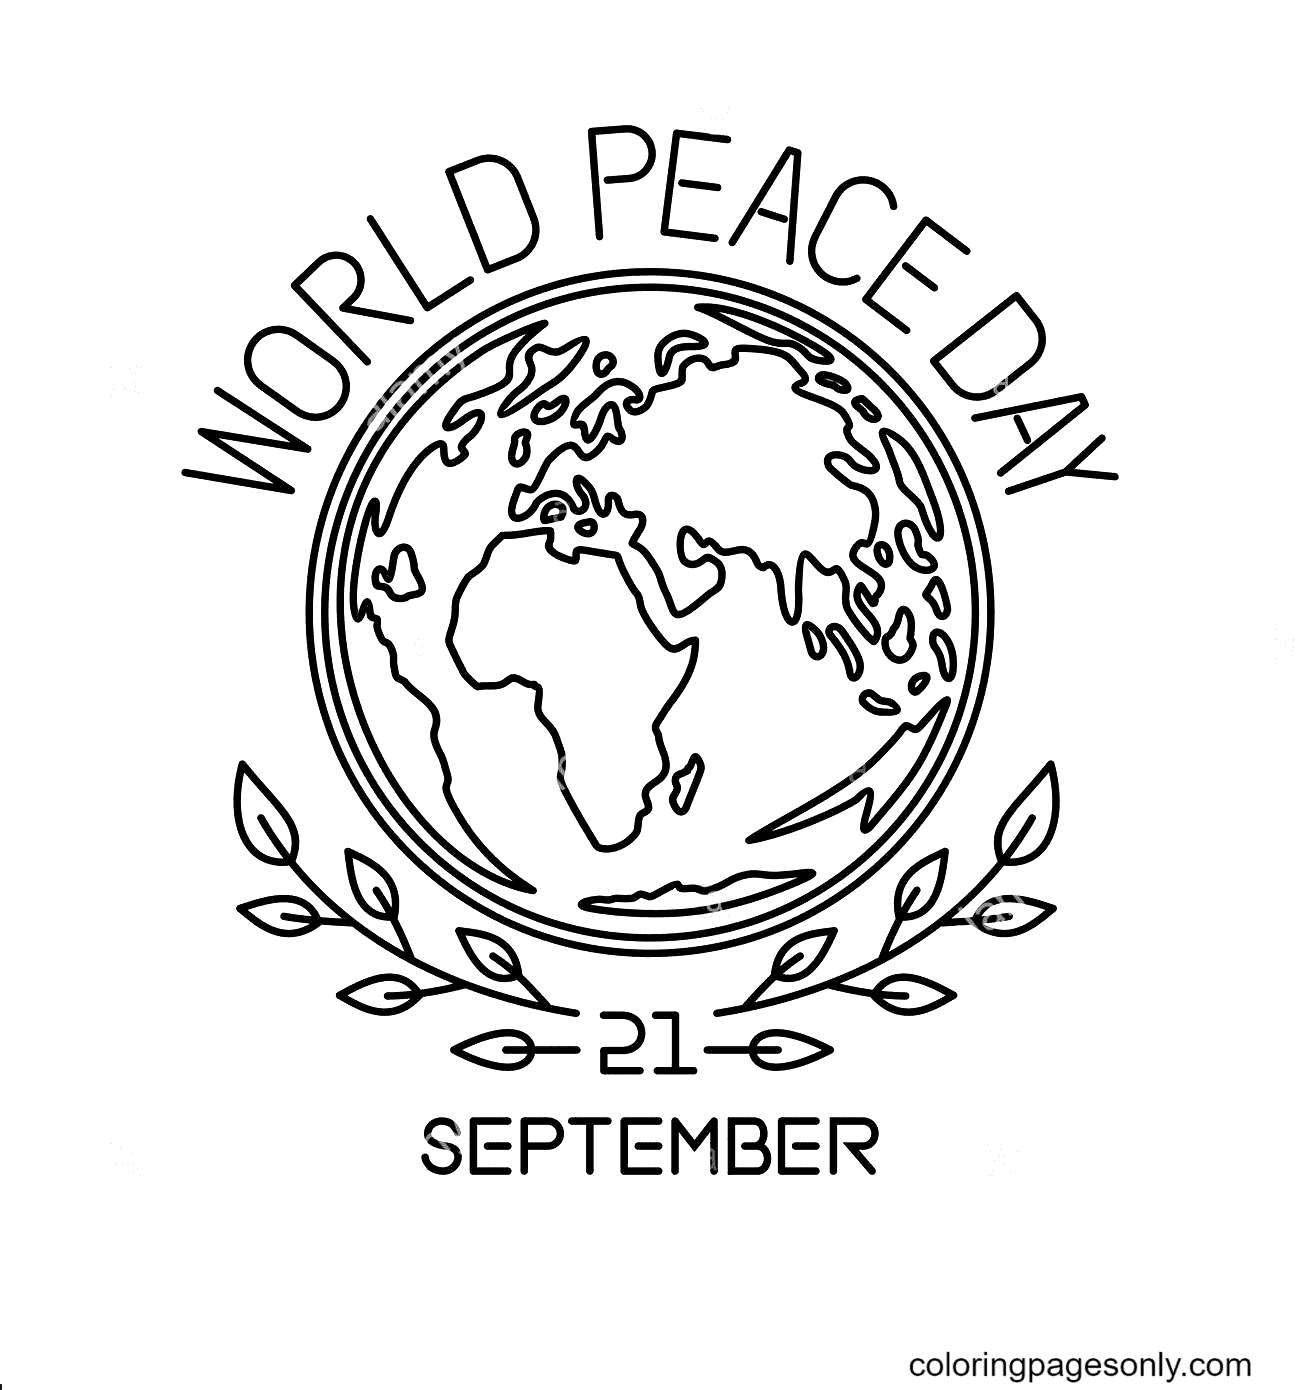 World Peace Day line logo Coloring Pages